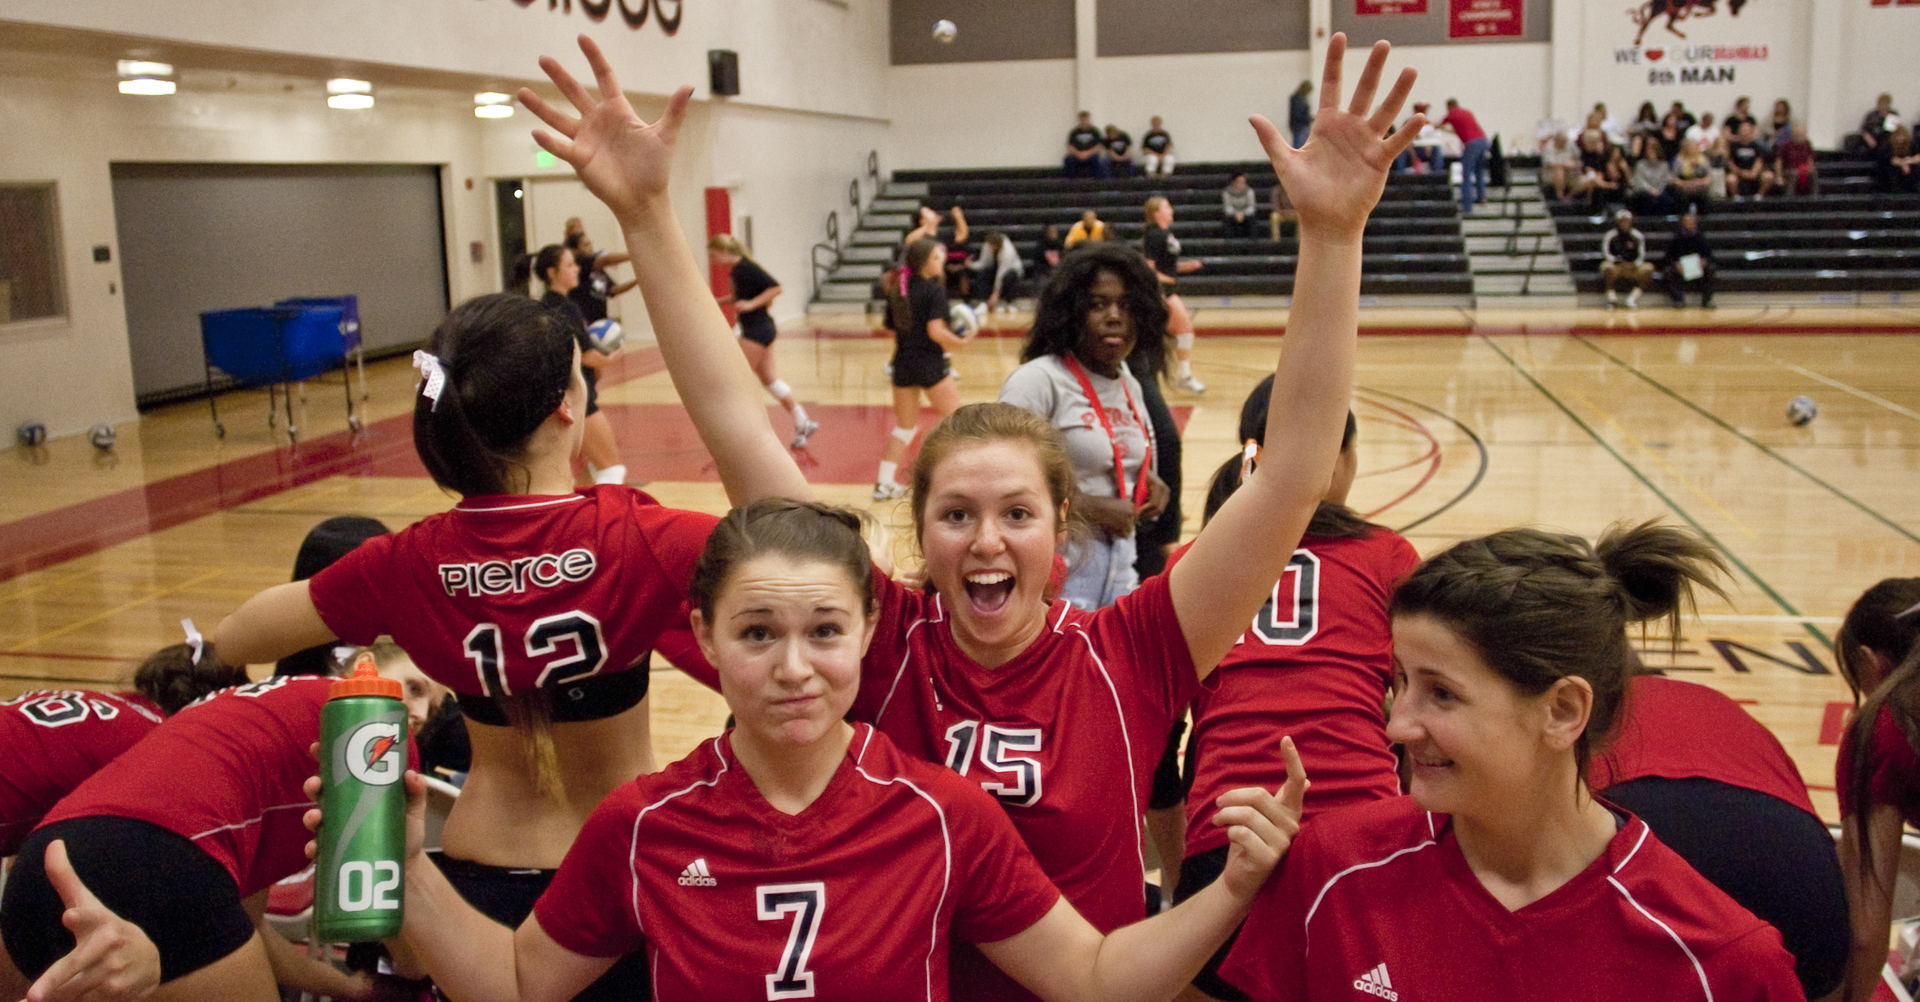 56 straight matches for women’s volleyball team